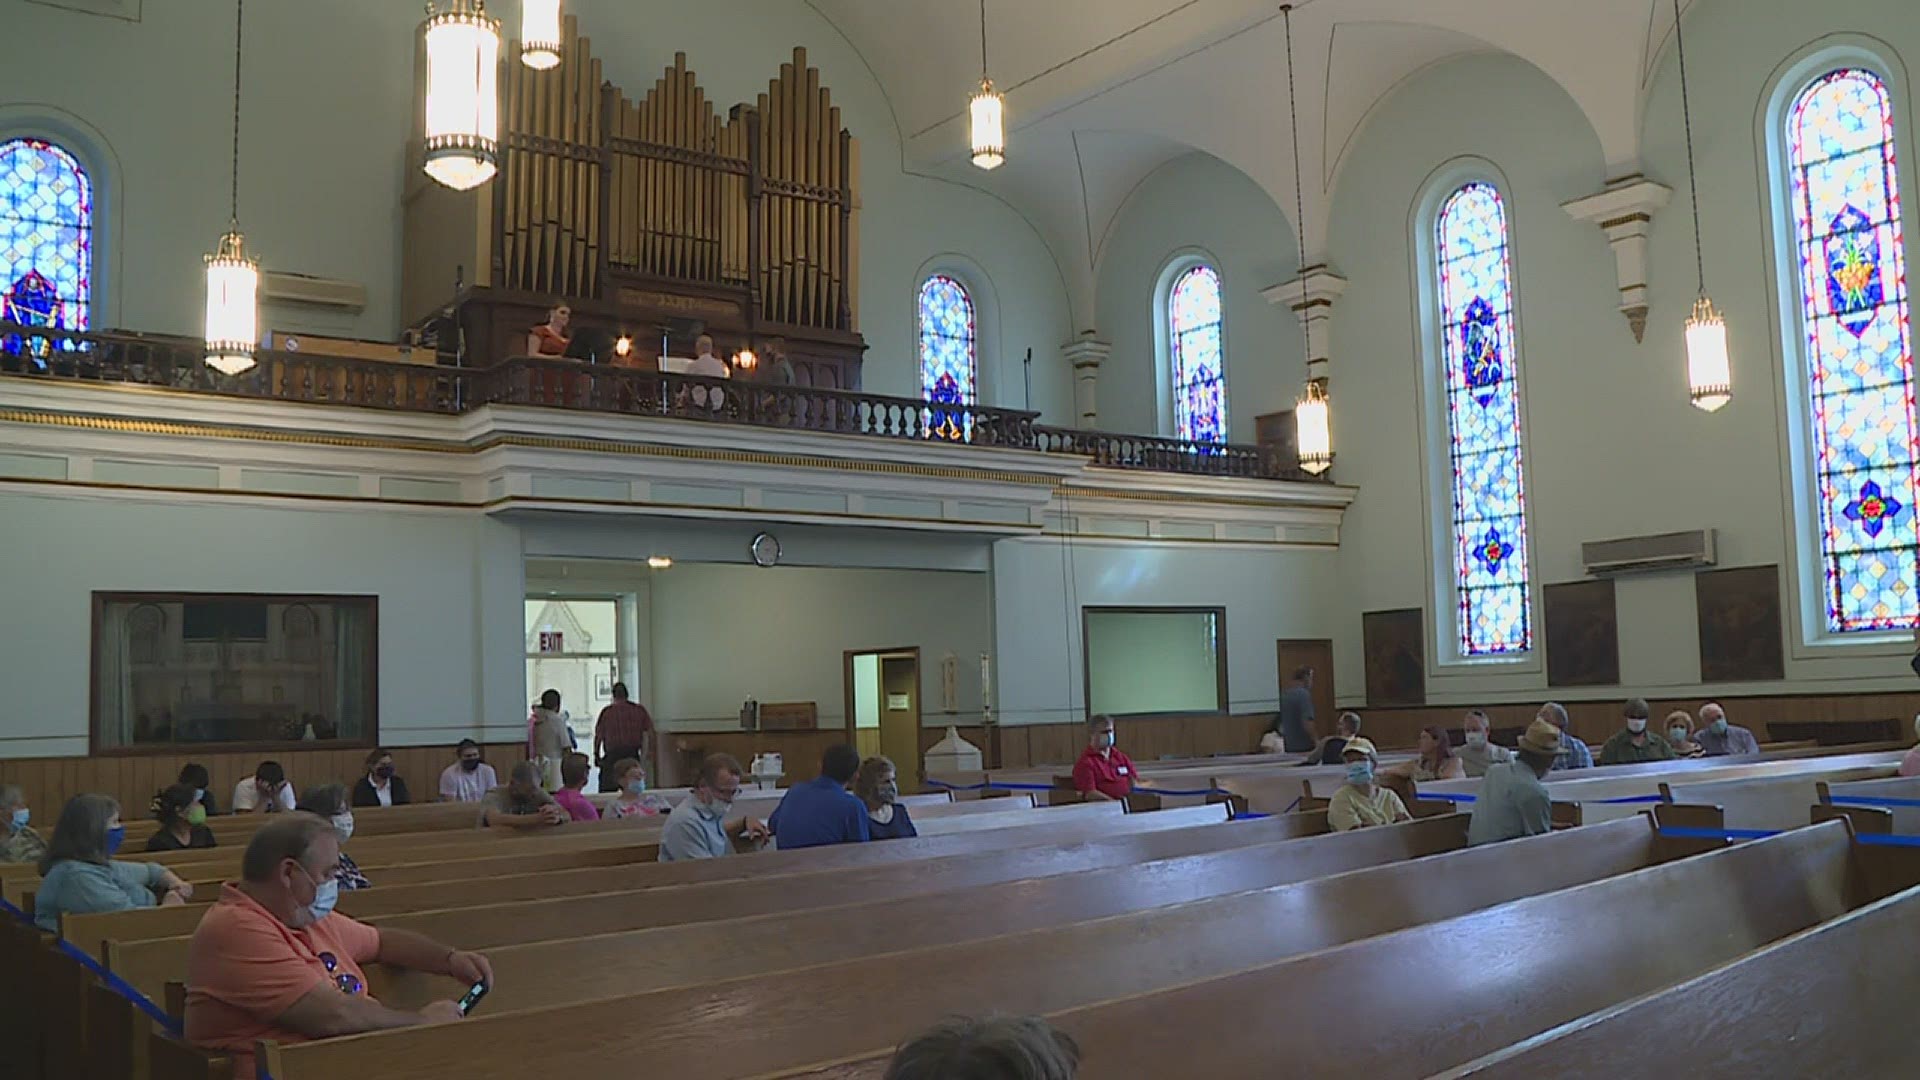 The organ is over a century old... and today, it played its final concert at its original location.